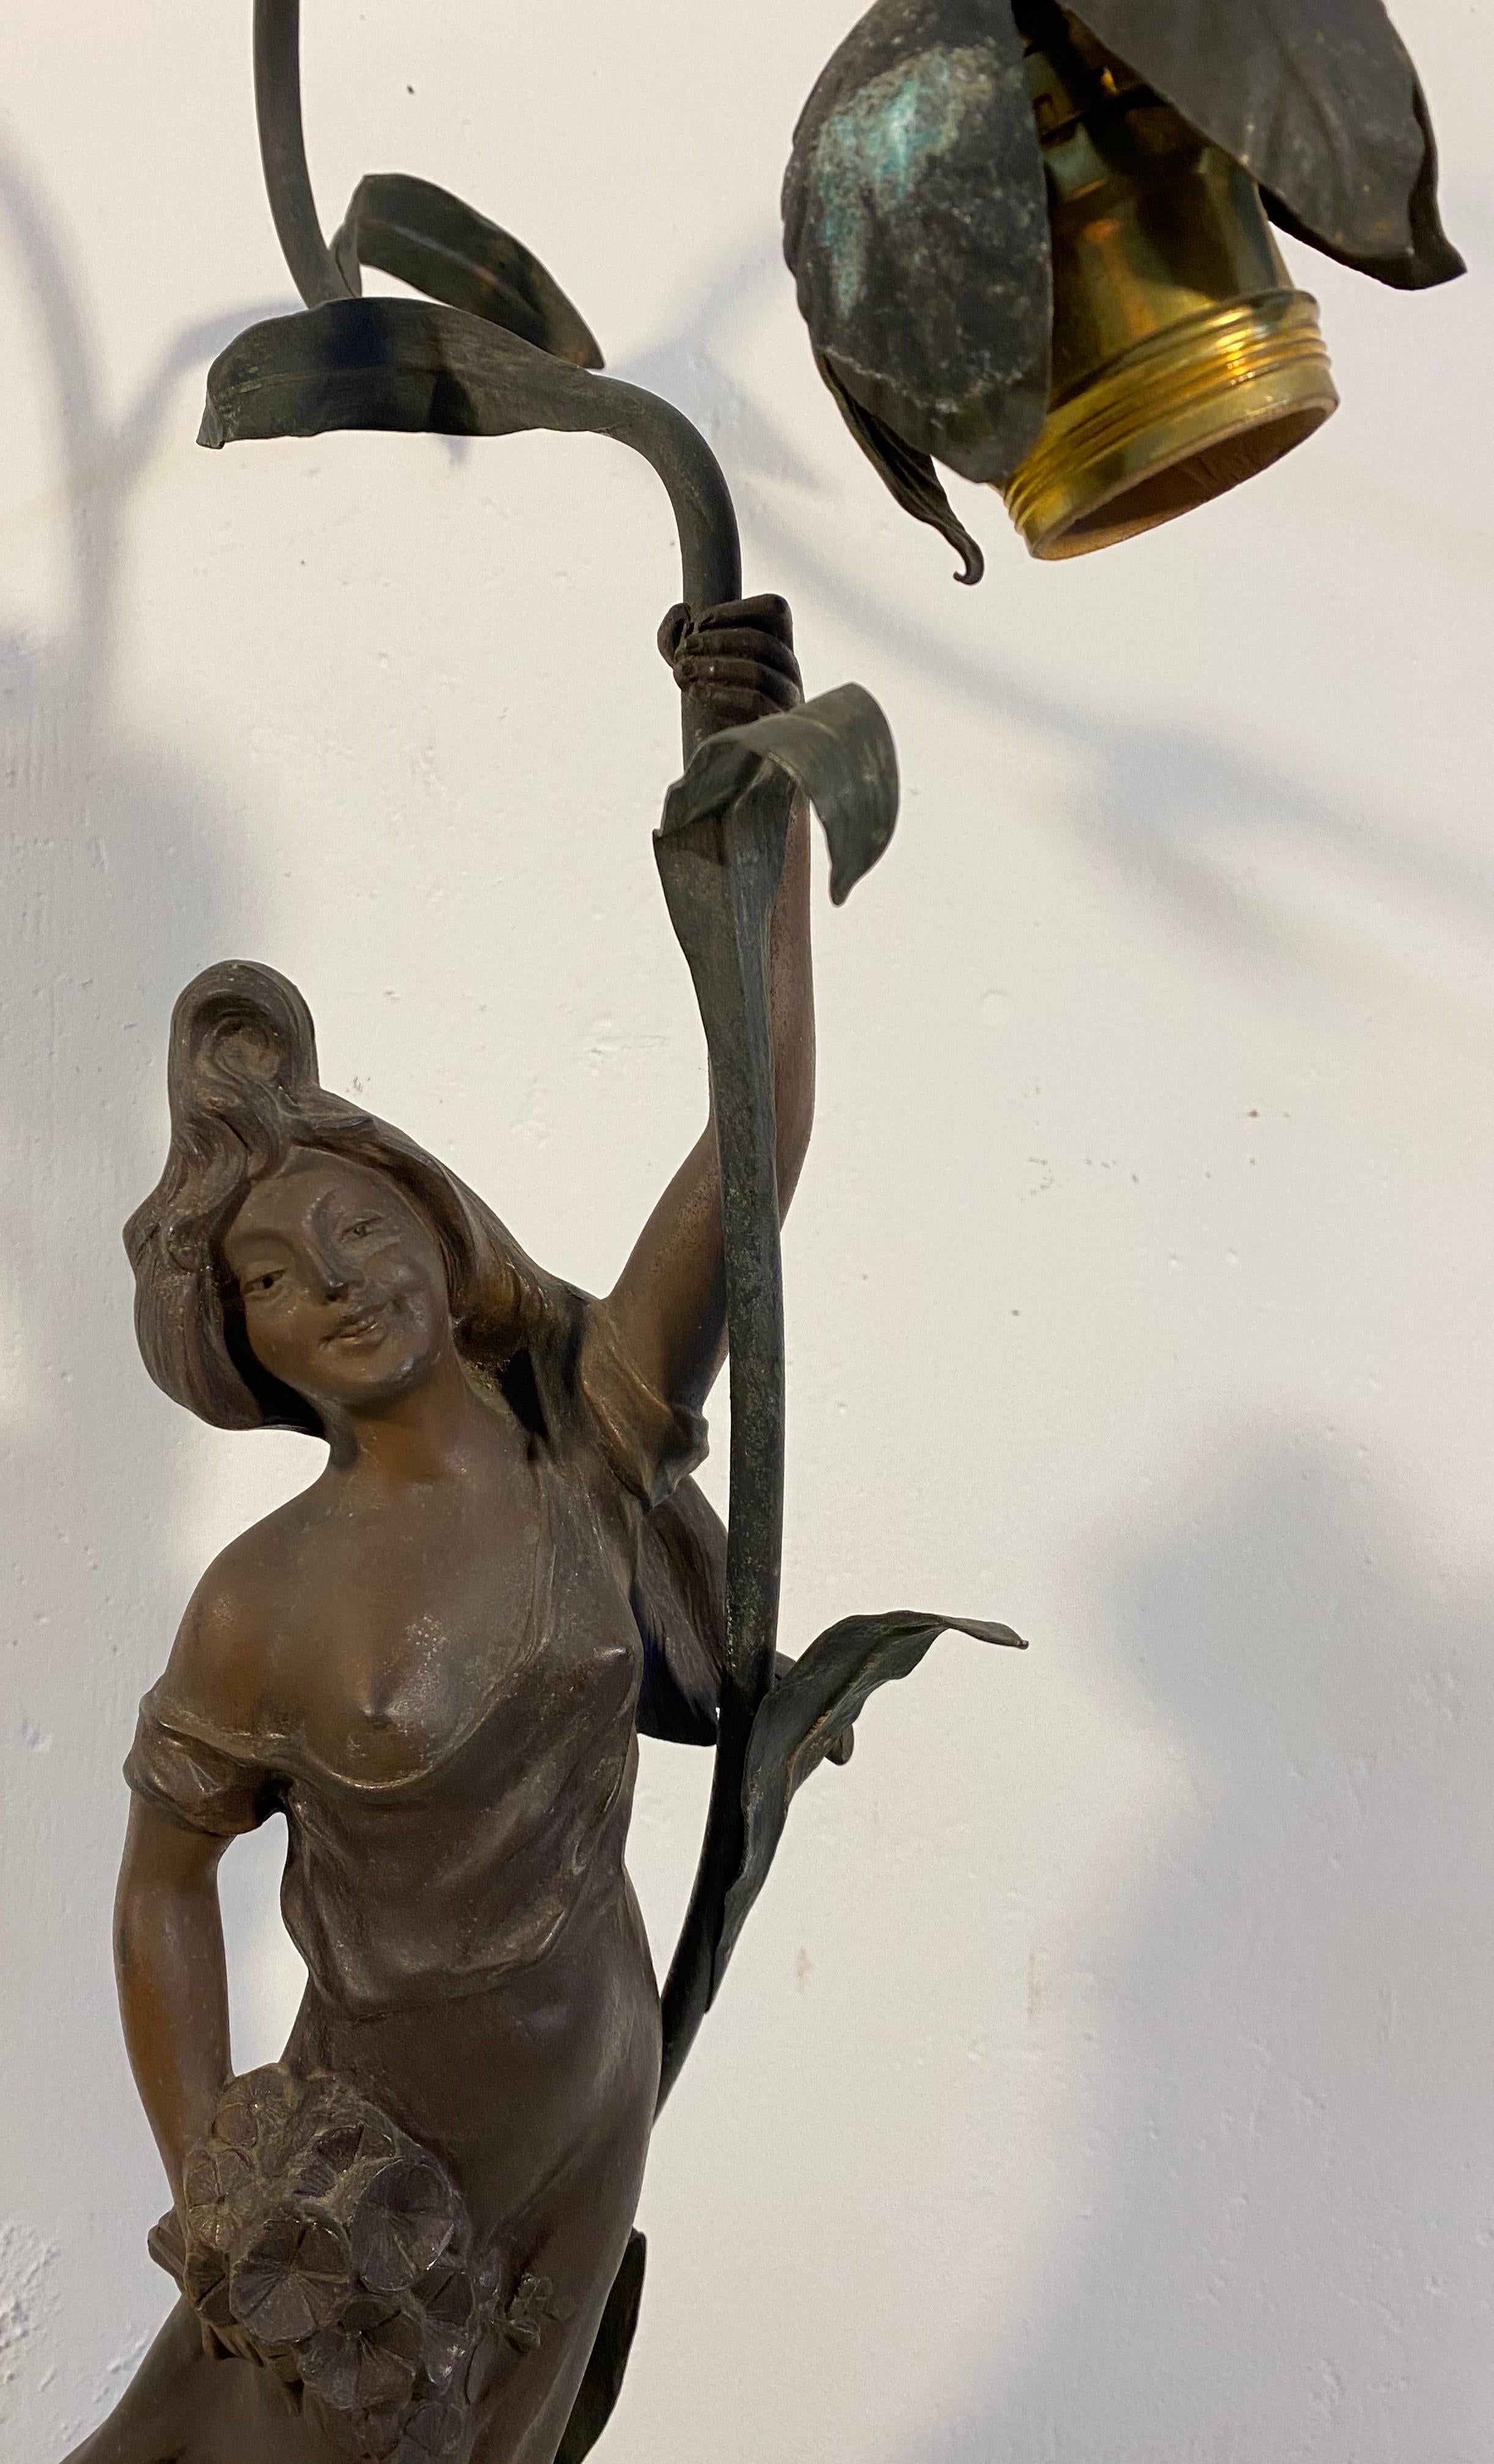 Early 20th century Art Nouveau copper table lamp by Rosseau

Classic Art Nouveau sculpture of a beautiful young woman in a flowing dress

The lamp has a single socket and is wired for immediate use

The sculpture measures 7